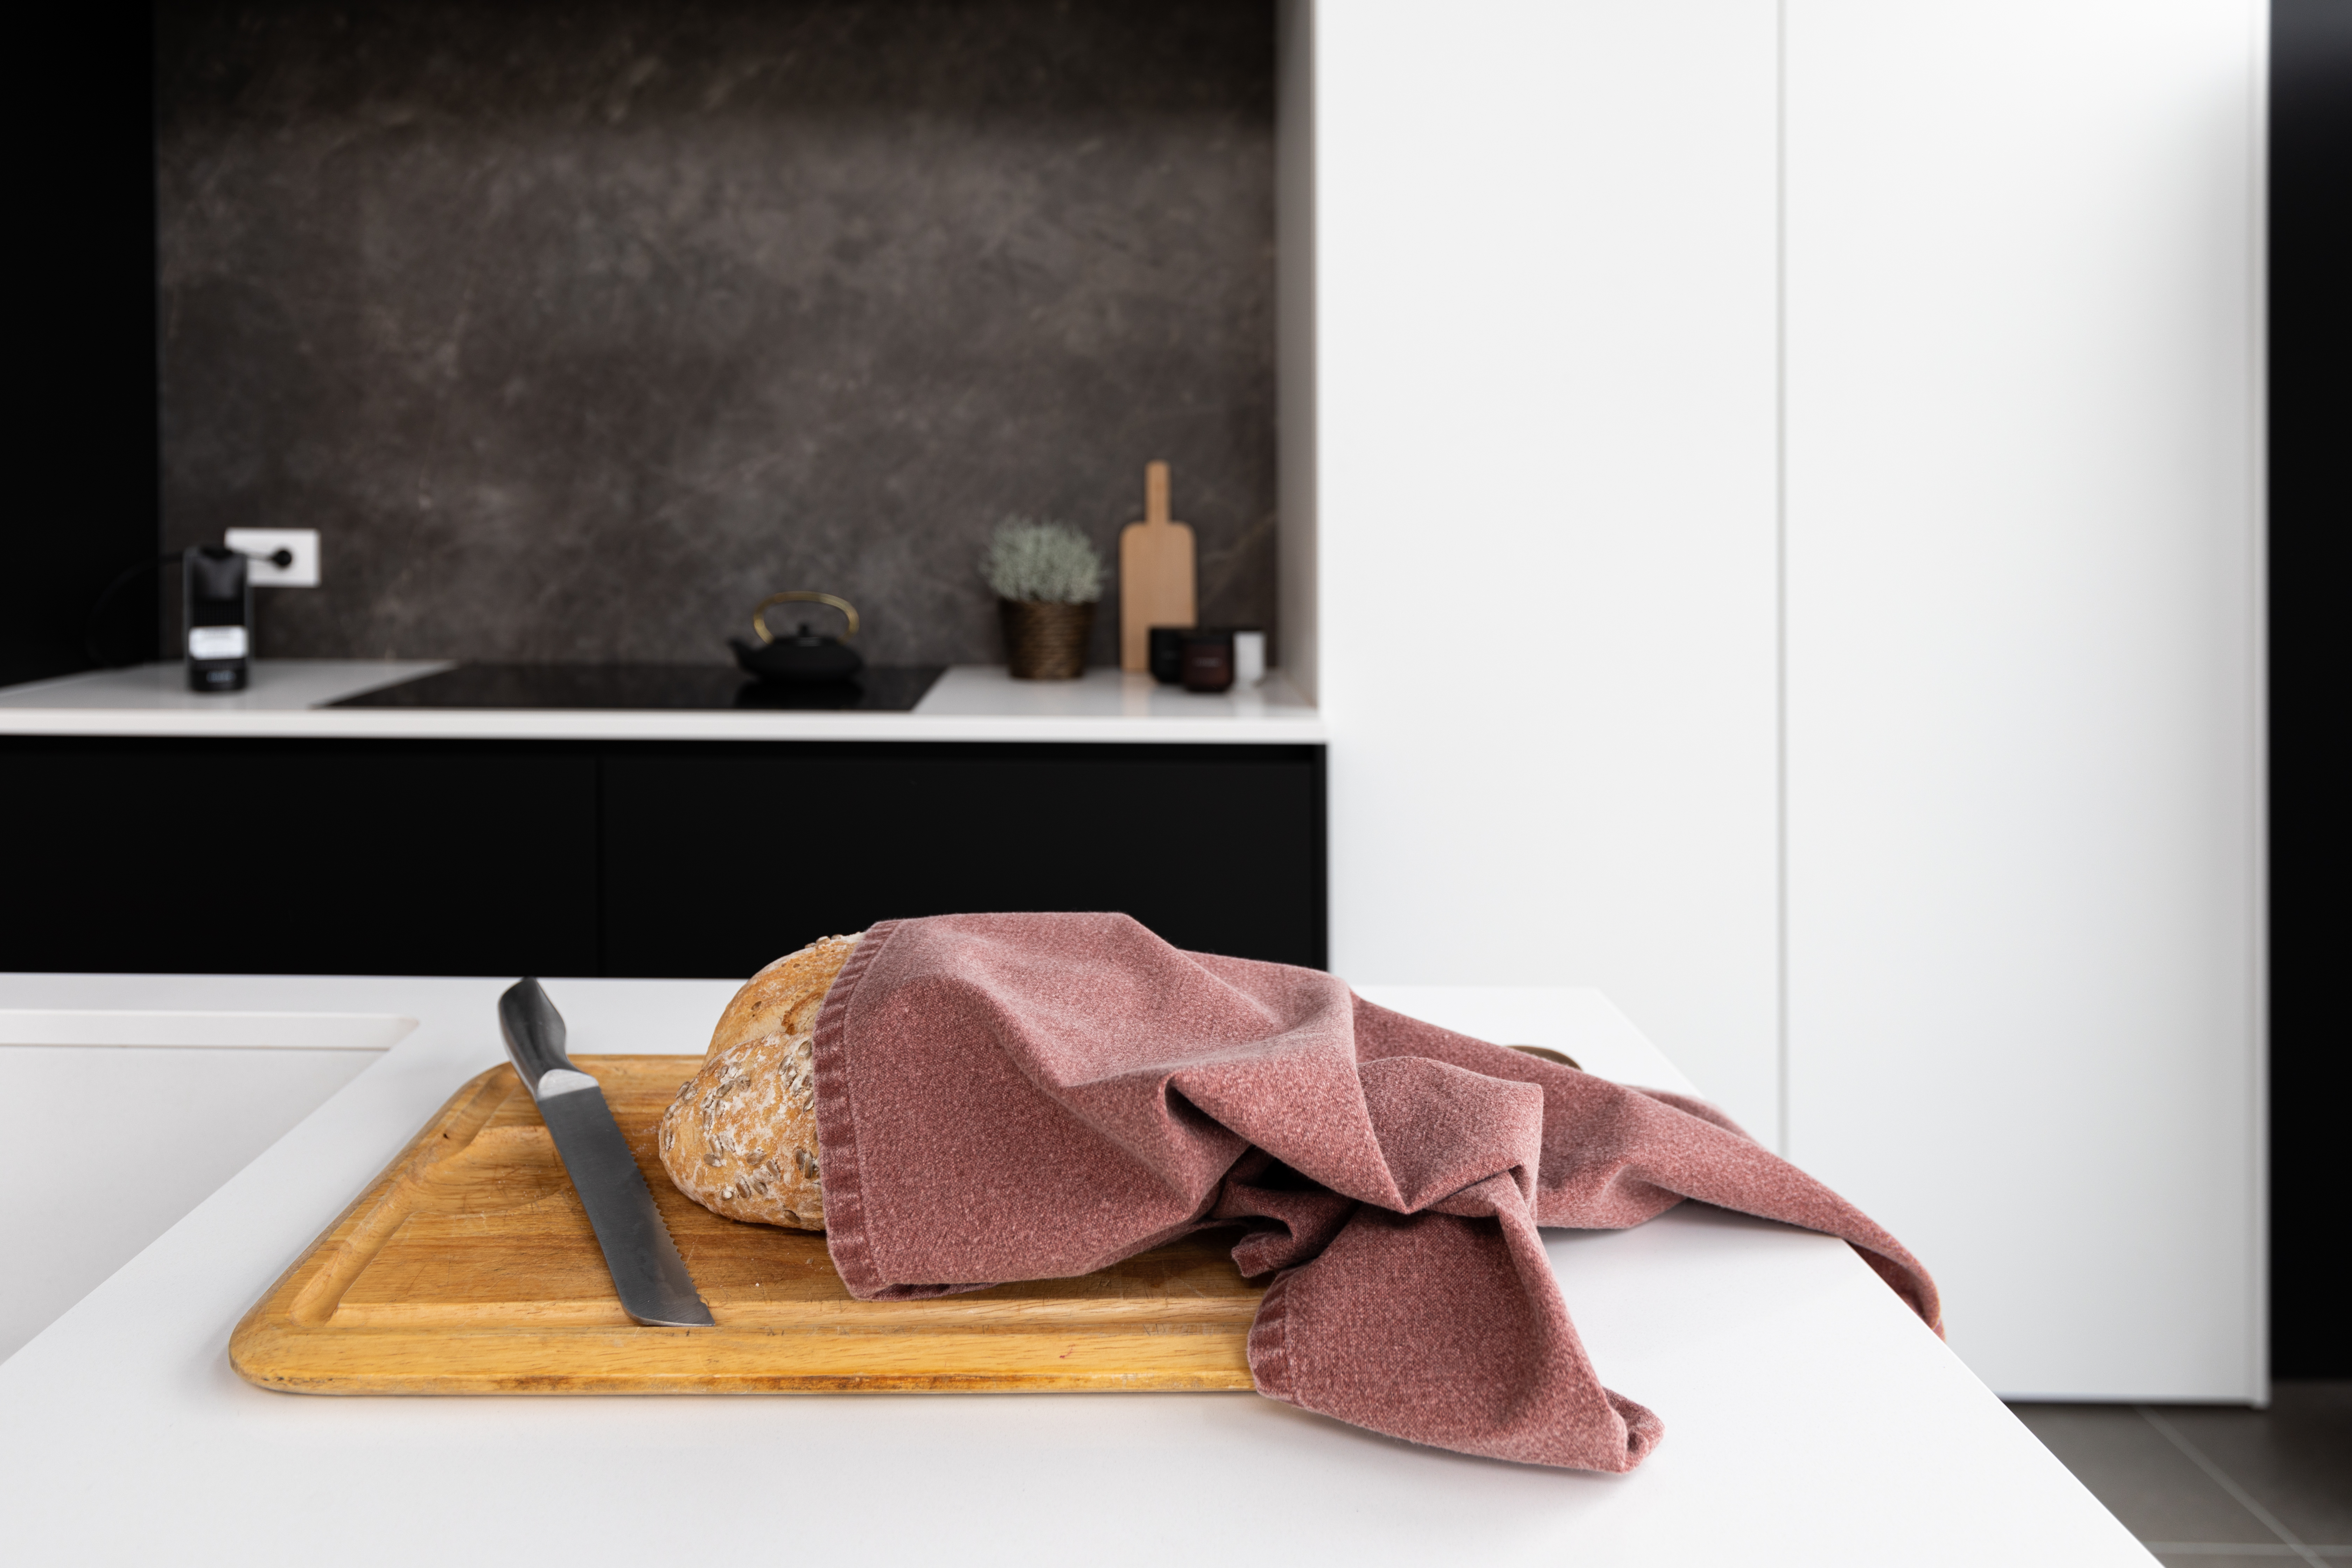 A kitchen towel is wrapped around a loaf of bread that is placed on a cutting board.